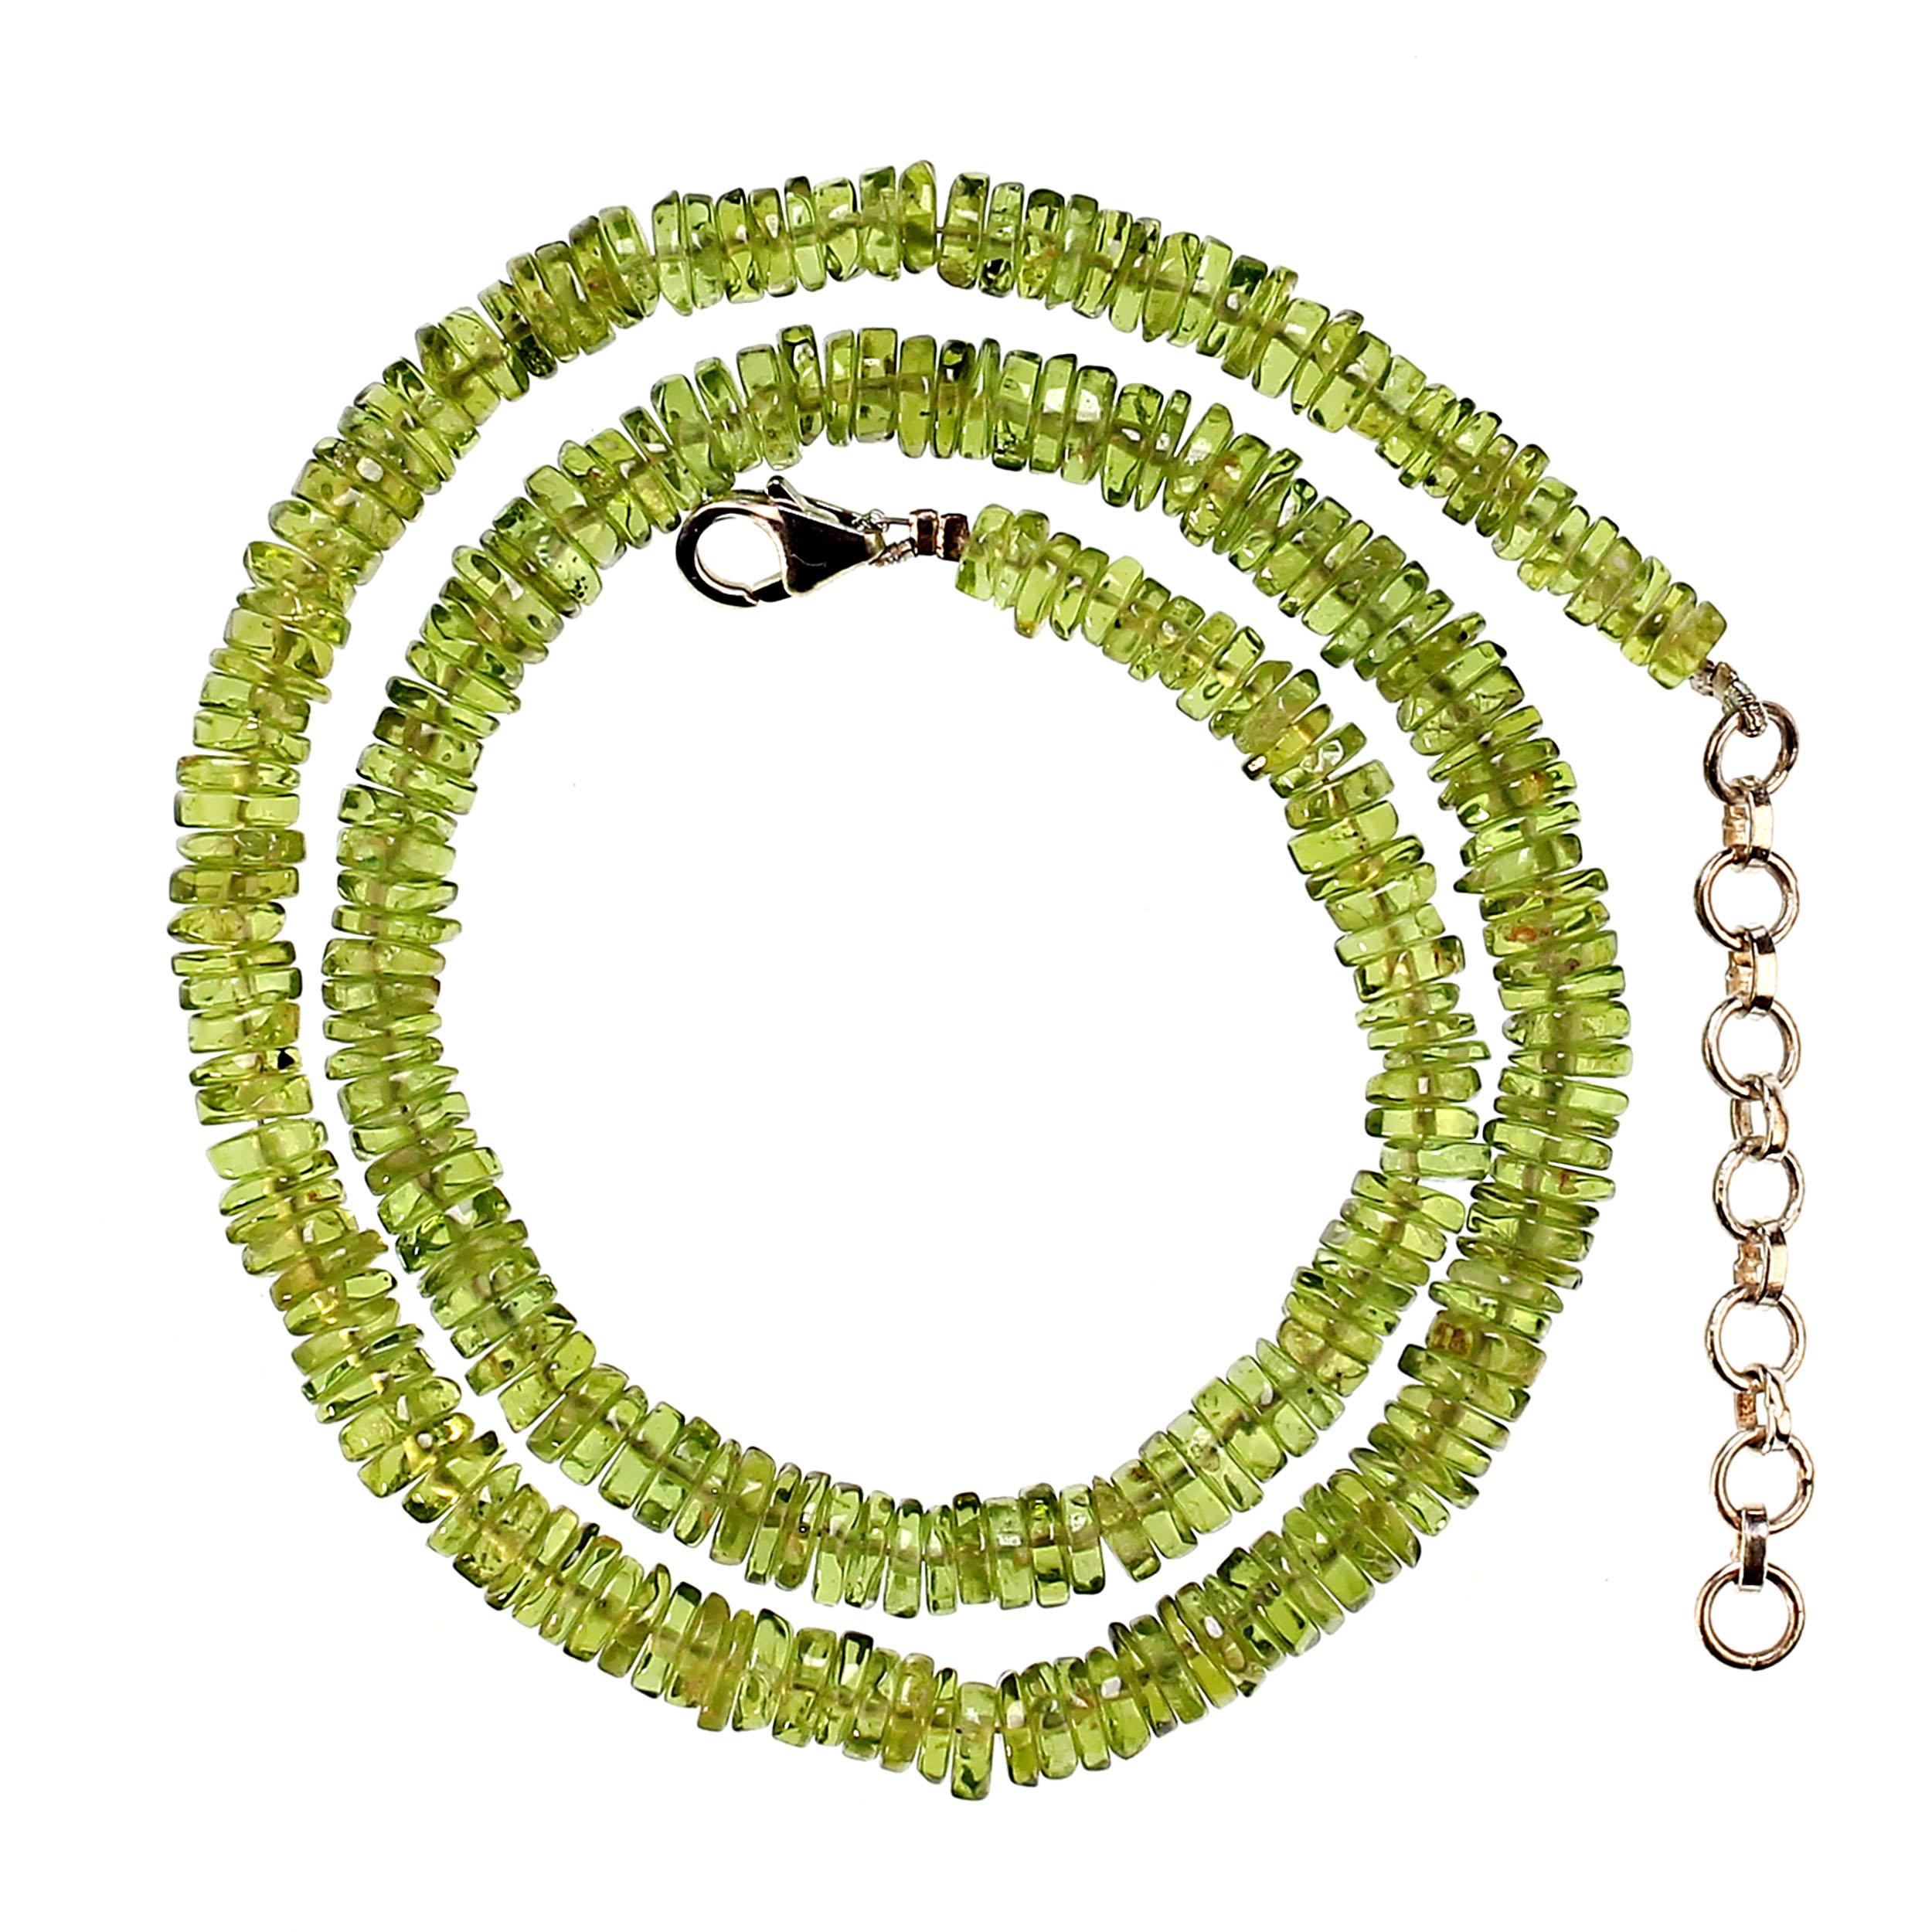 Bead AJD 16 Inch Polished Peridot Rondelles Choker necklace  Perfect Gift! For Sale